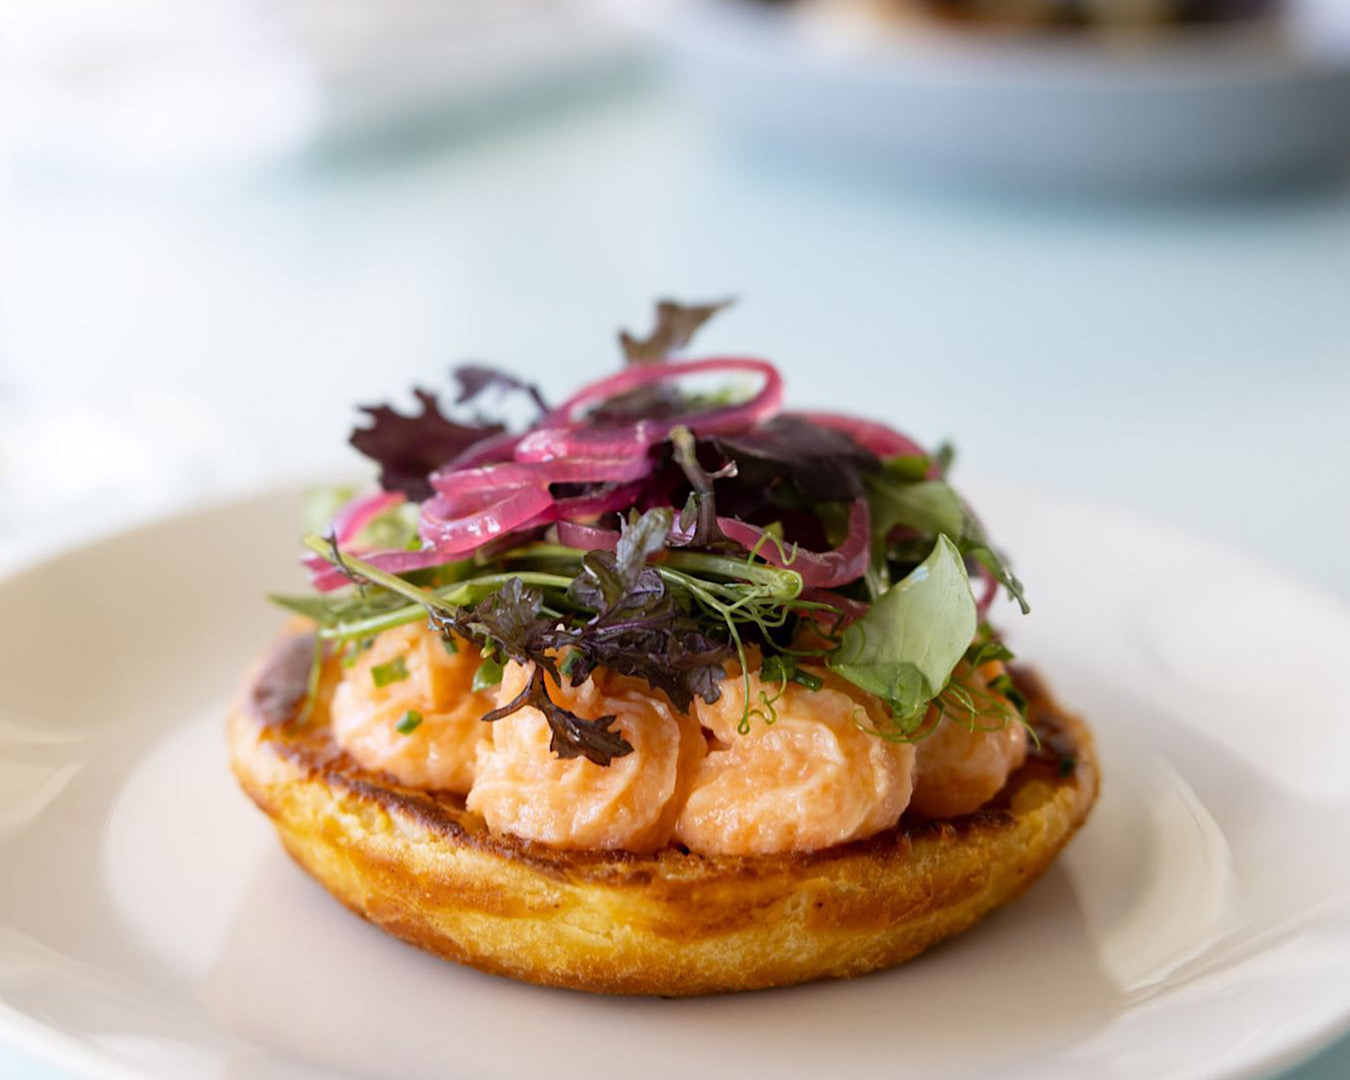 A plump salmon and horseradish crumpet sits on a plate at The Oyster Inn, one of the best restaurants on Waiheke Island. 